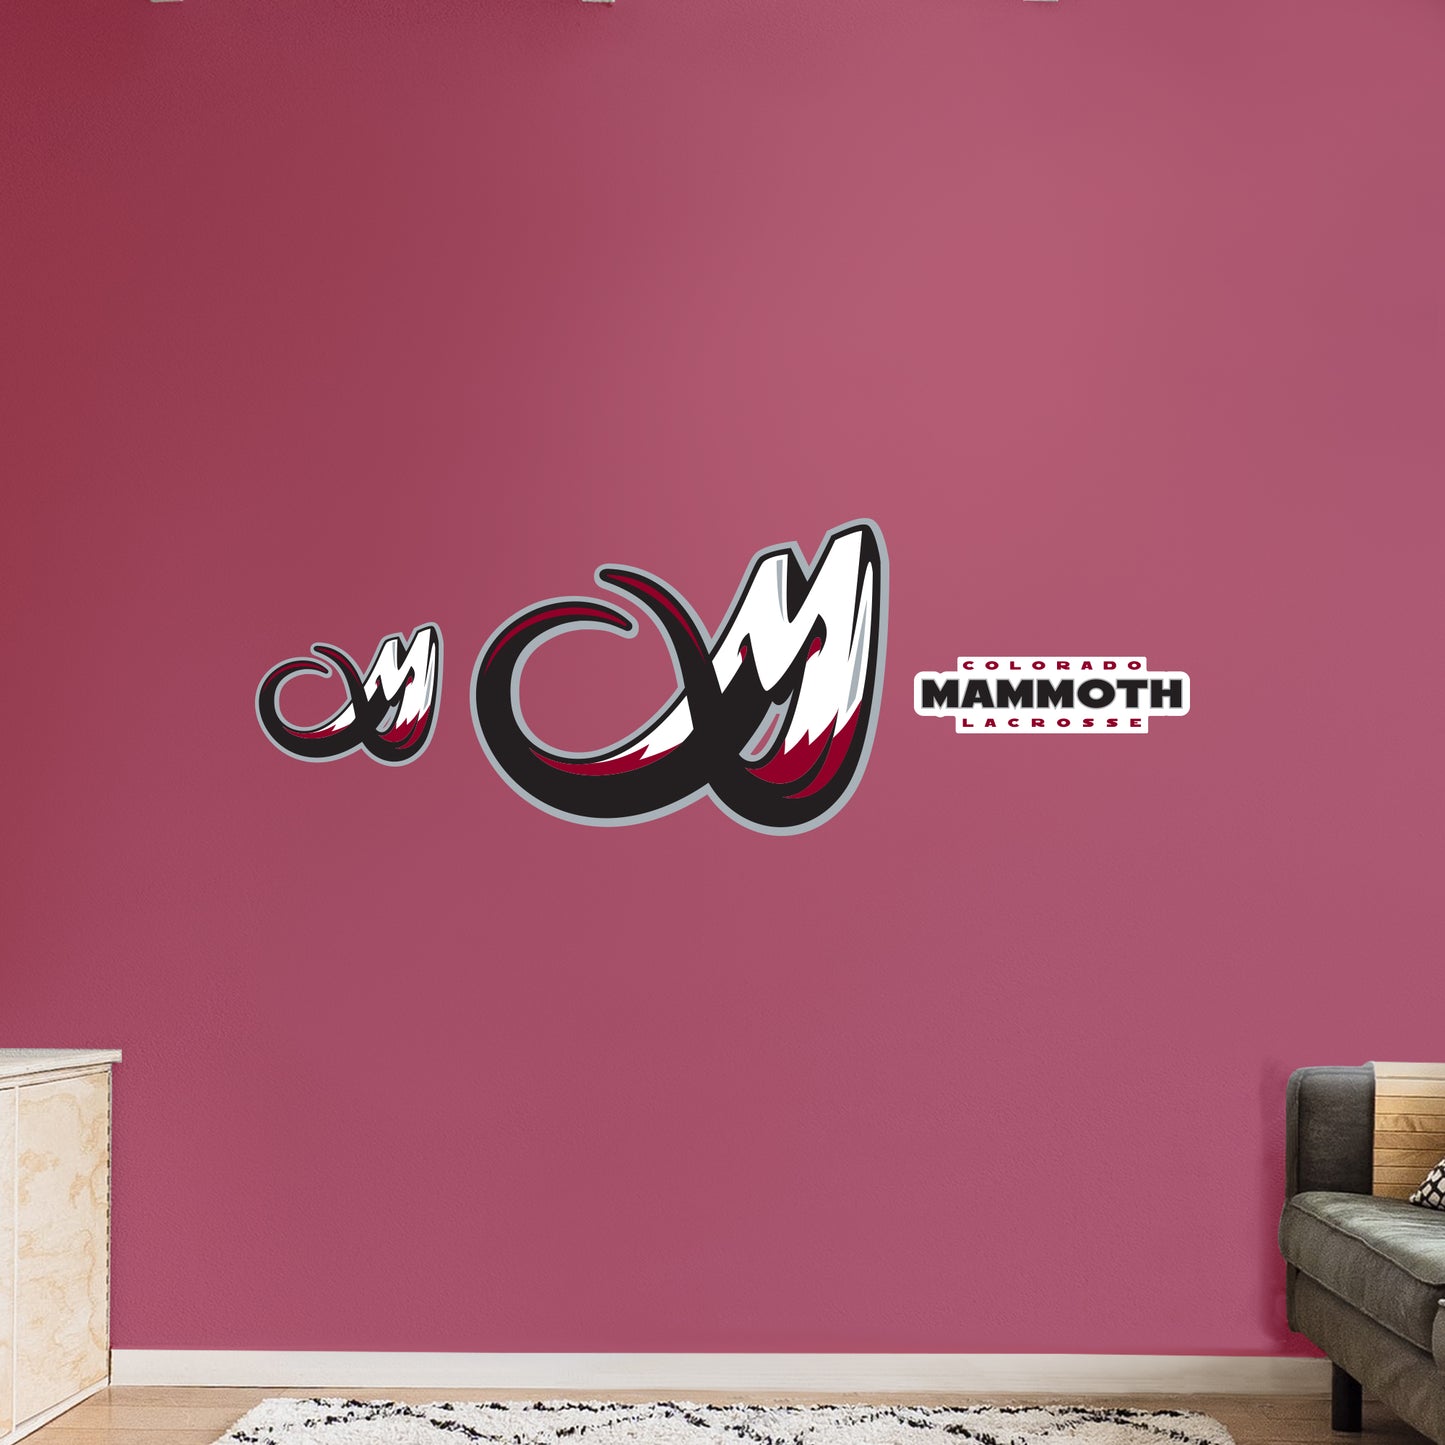 Colorado Mammoth:   Logo        - Officially Licensed NLL Removable     Adhesive Decal